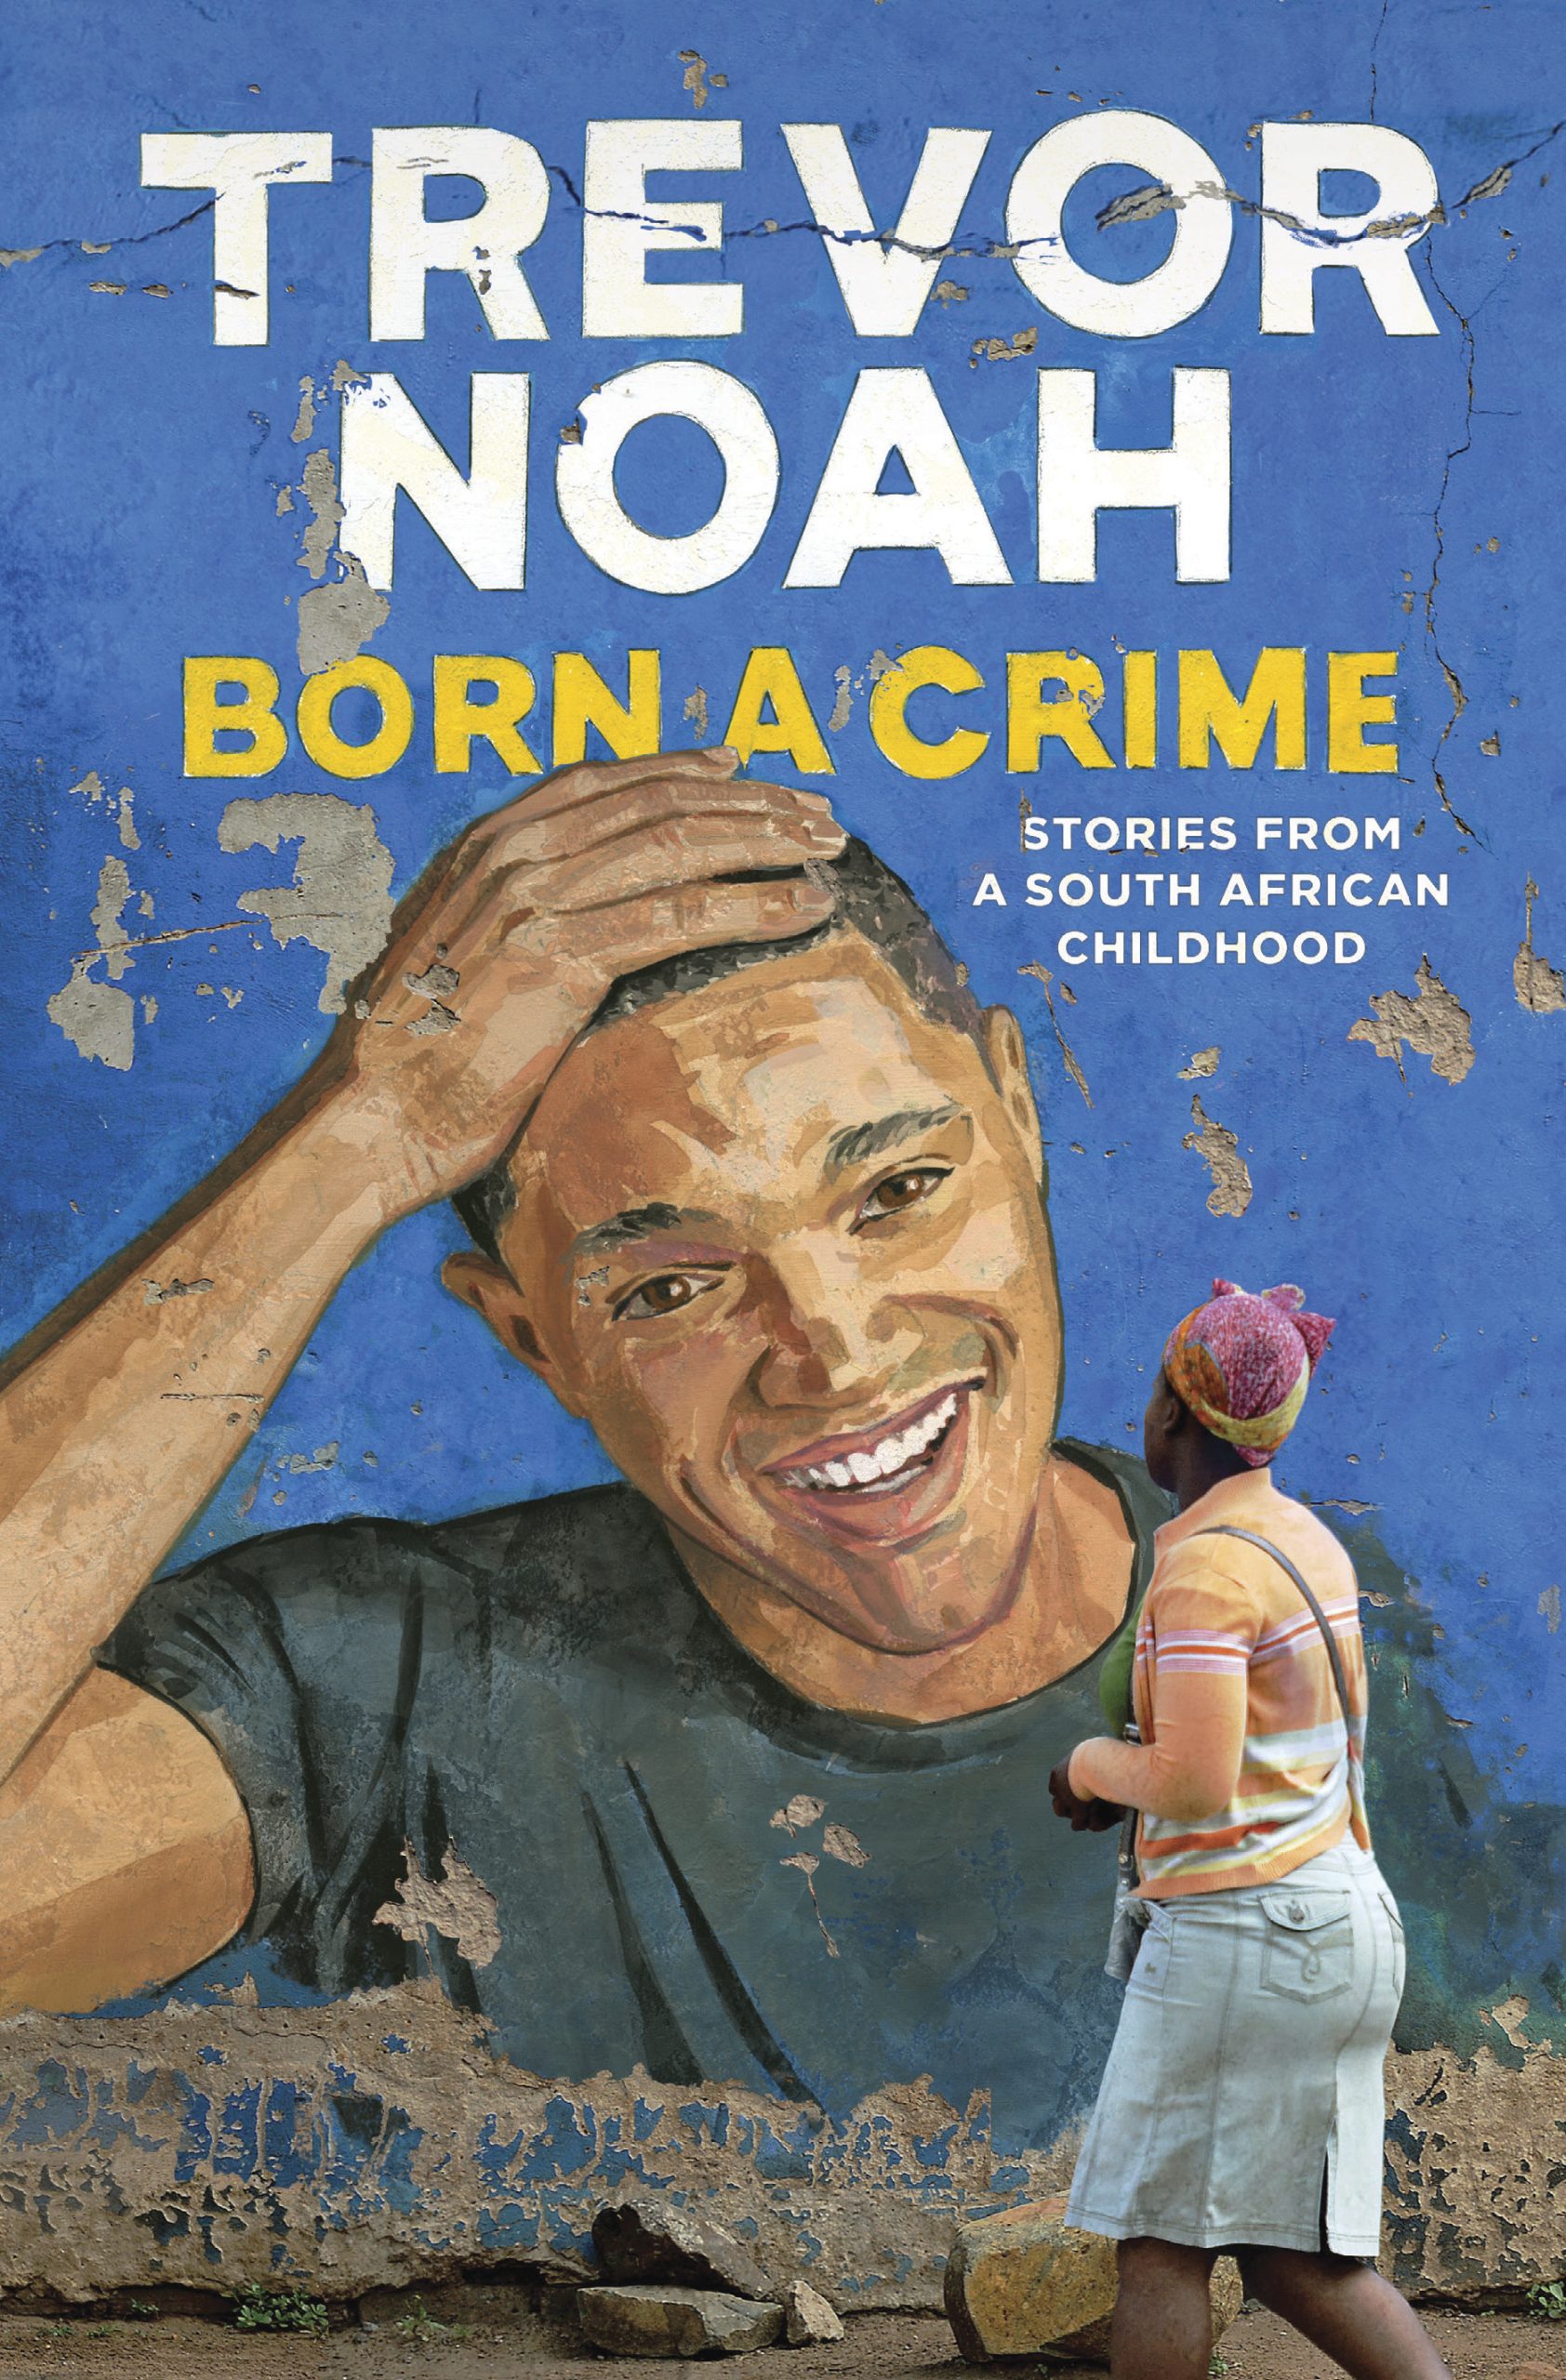 Born a Crime audiobook: Stories From a South African Childhood